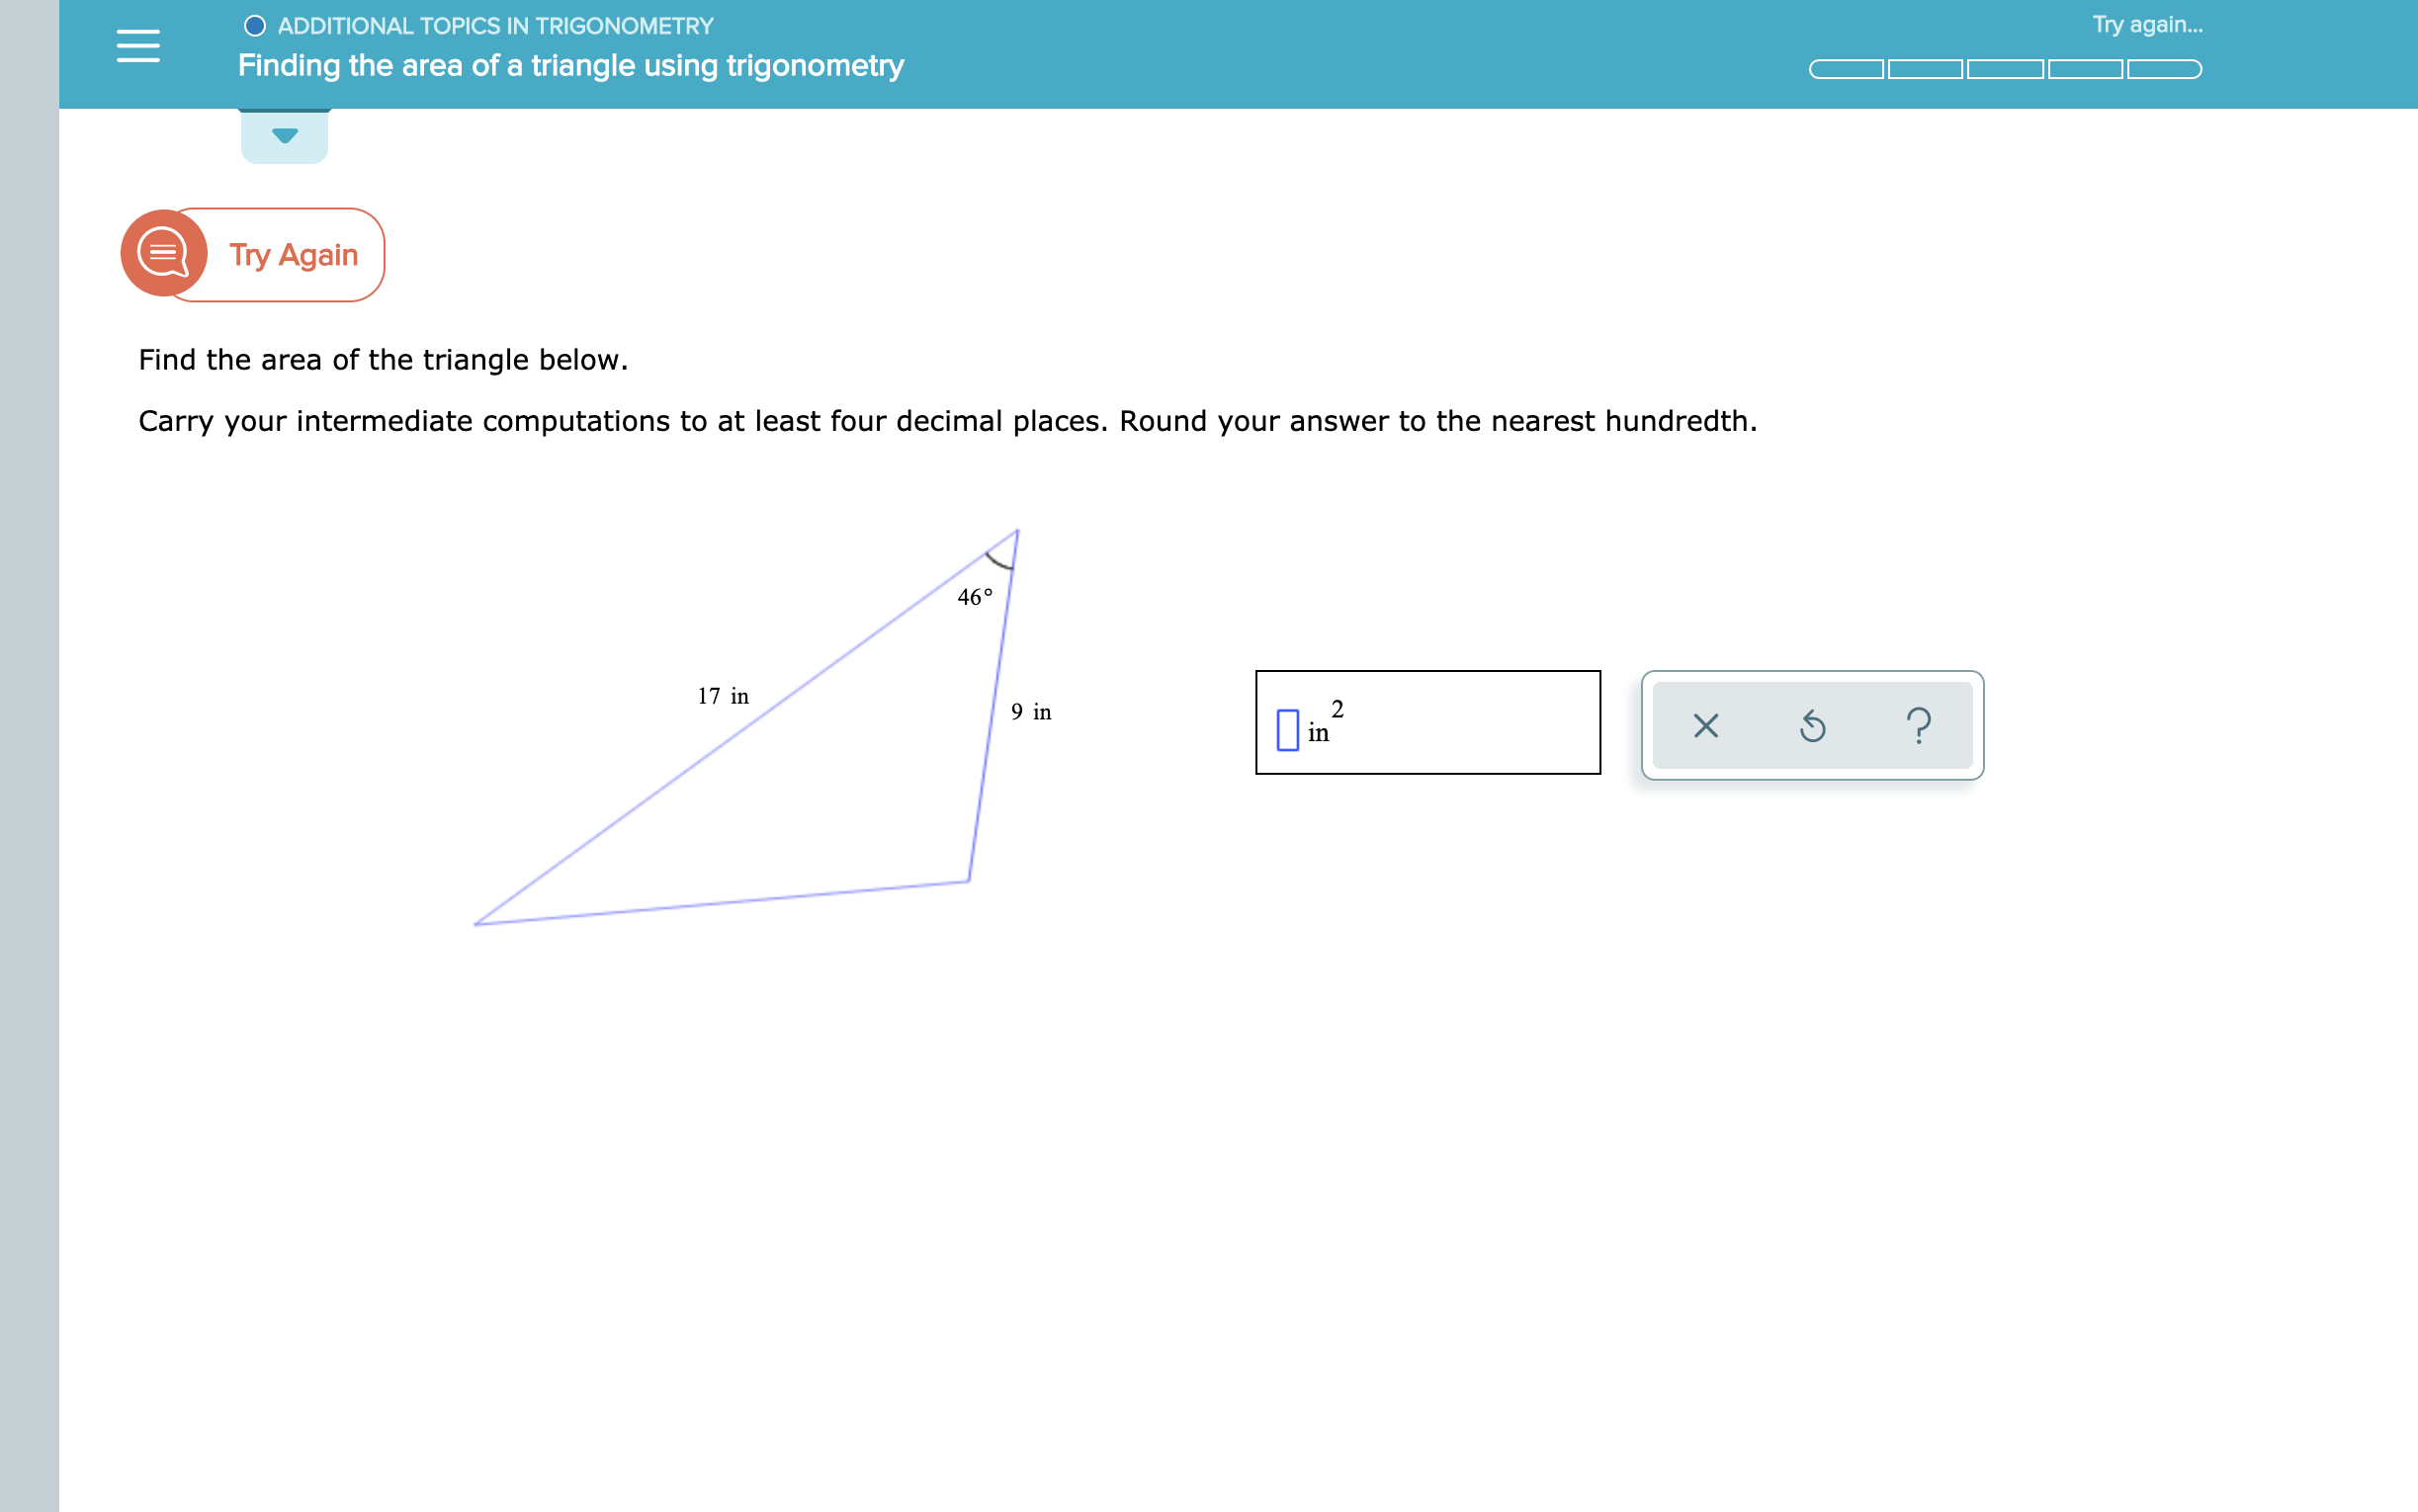 O ADDITIONAL TOPICS IN TRIGONOMETRY
Try again...
Finding the area of a triangle using trigonometry
Try Again
Find the area of the triangle below.
Carry your intermediate computations to at least four decimal places. Round your answer to the nearest hundredth.
46°
17 in
2
in
9 in
?
